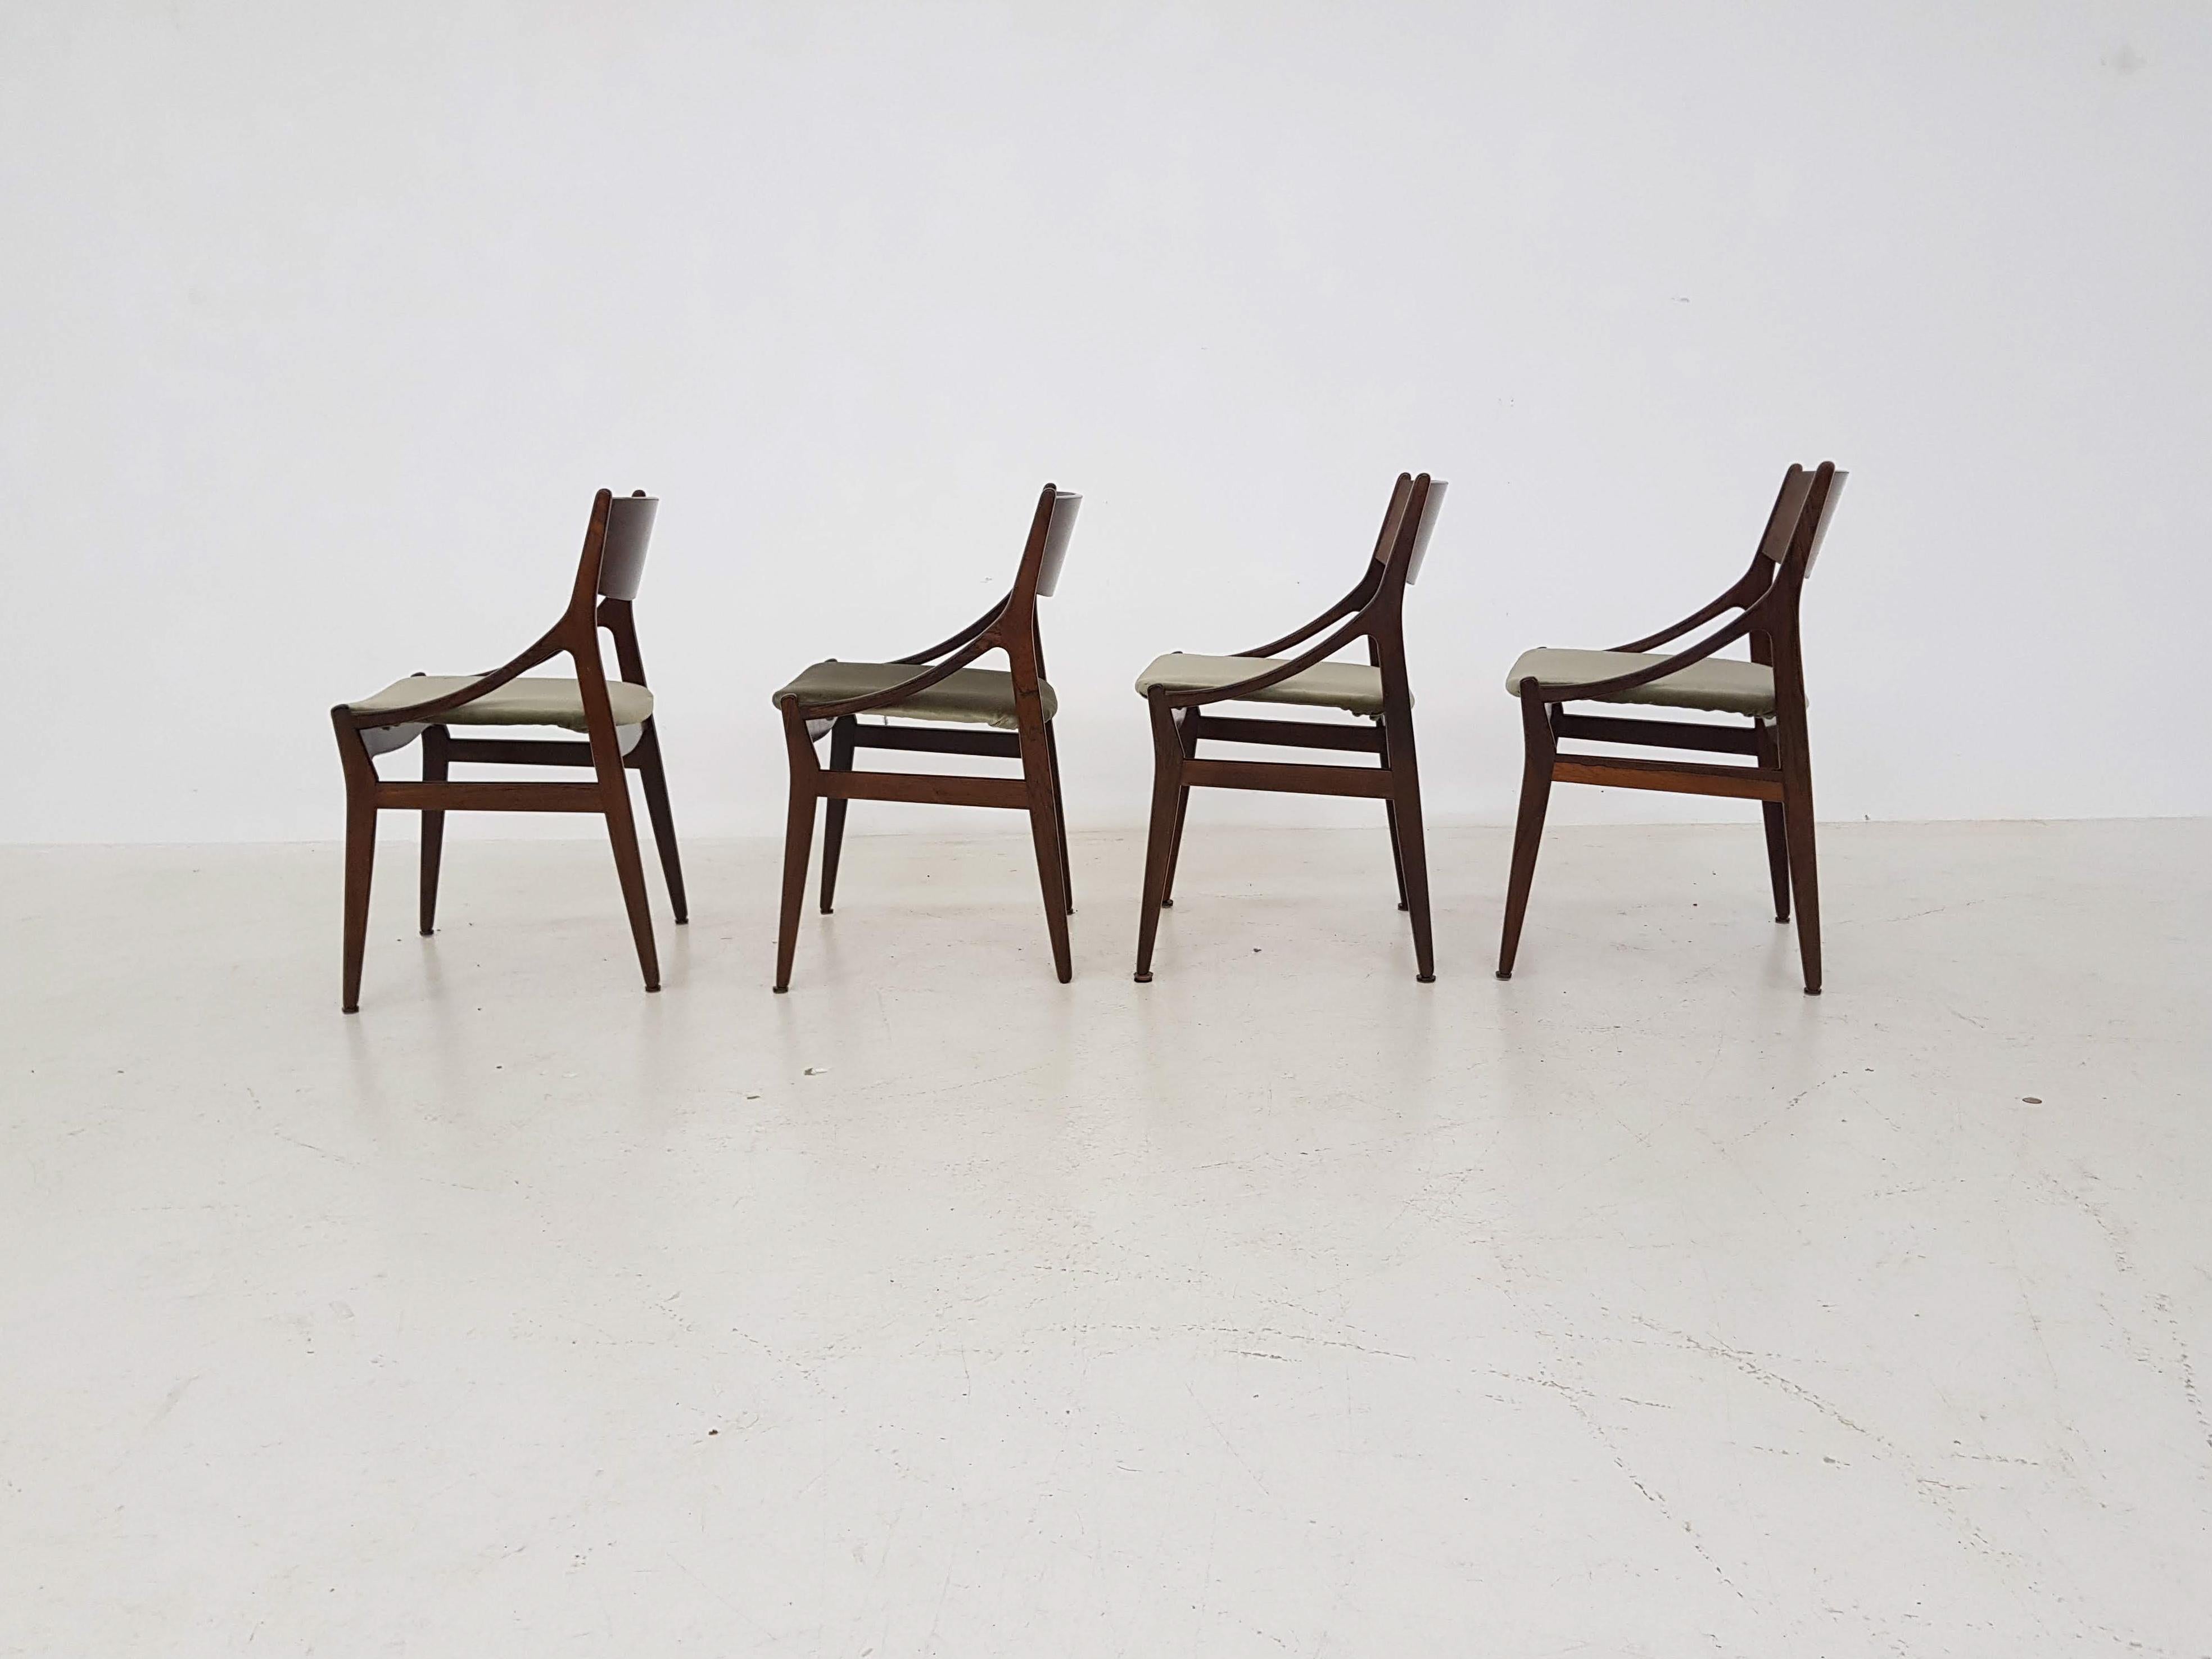 Set of 4 dining chairs by Vestervig Erikson for Brdr Tromborg Lystrup, Denmark, 1960s.

These fine mid century Danish dining chairs are made of beautiful rosewood with a seating upholstered with new green, greyish velvet fabric. High quality Danish